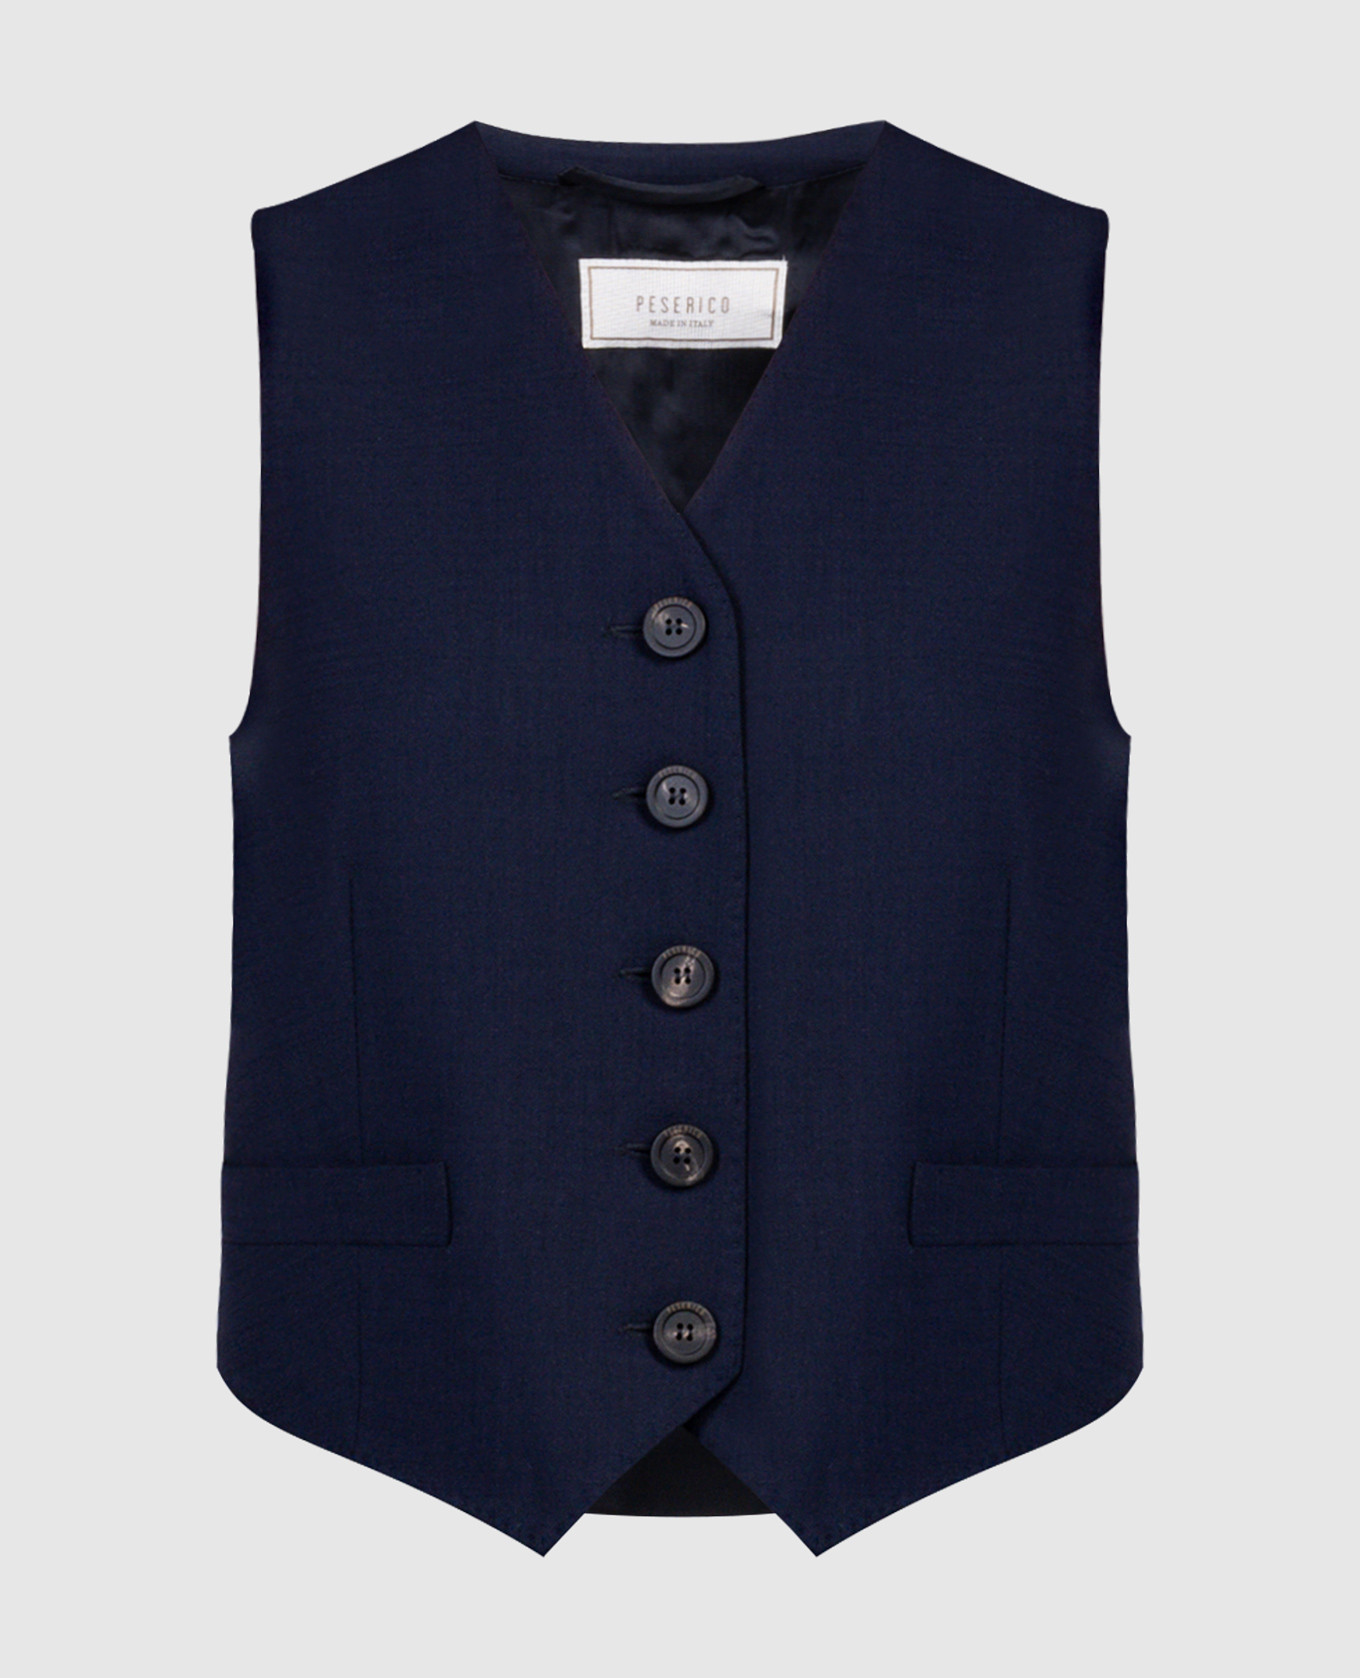 Blue vest with brand patch